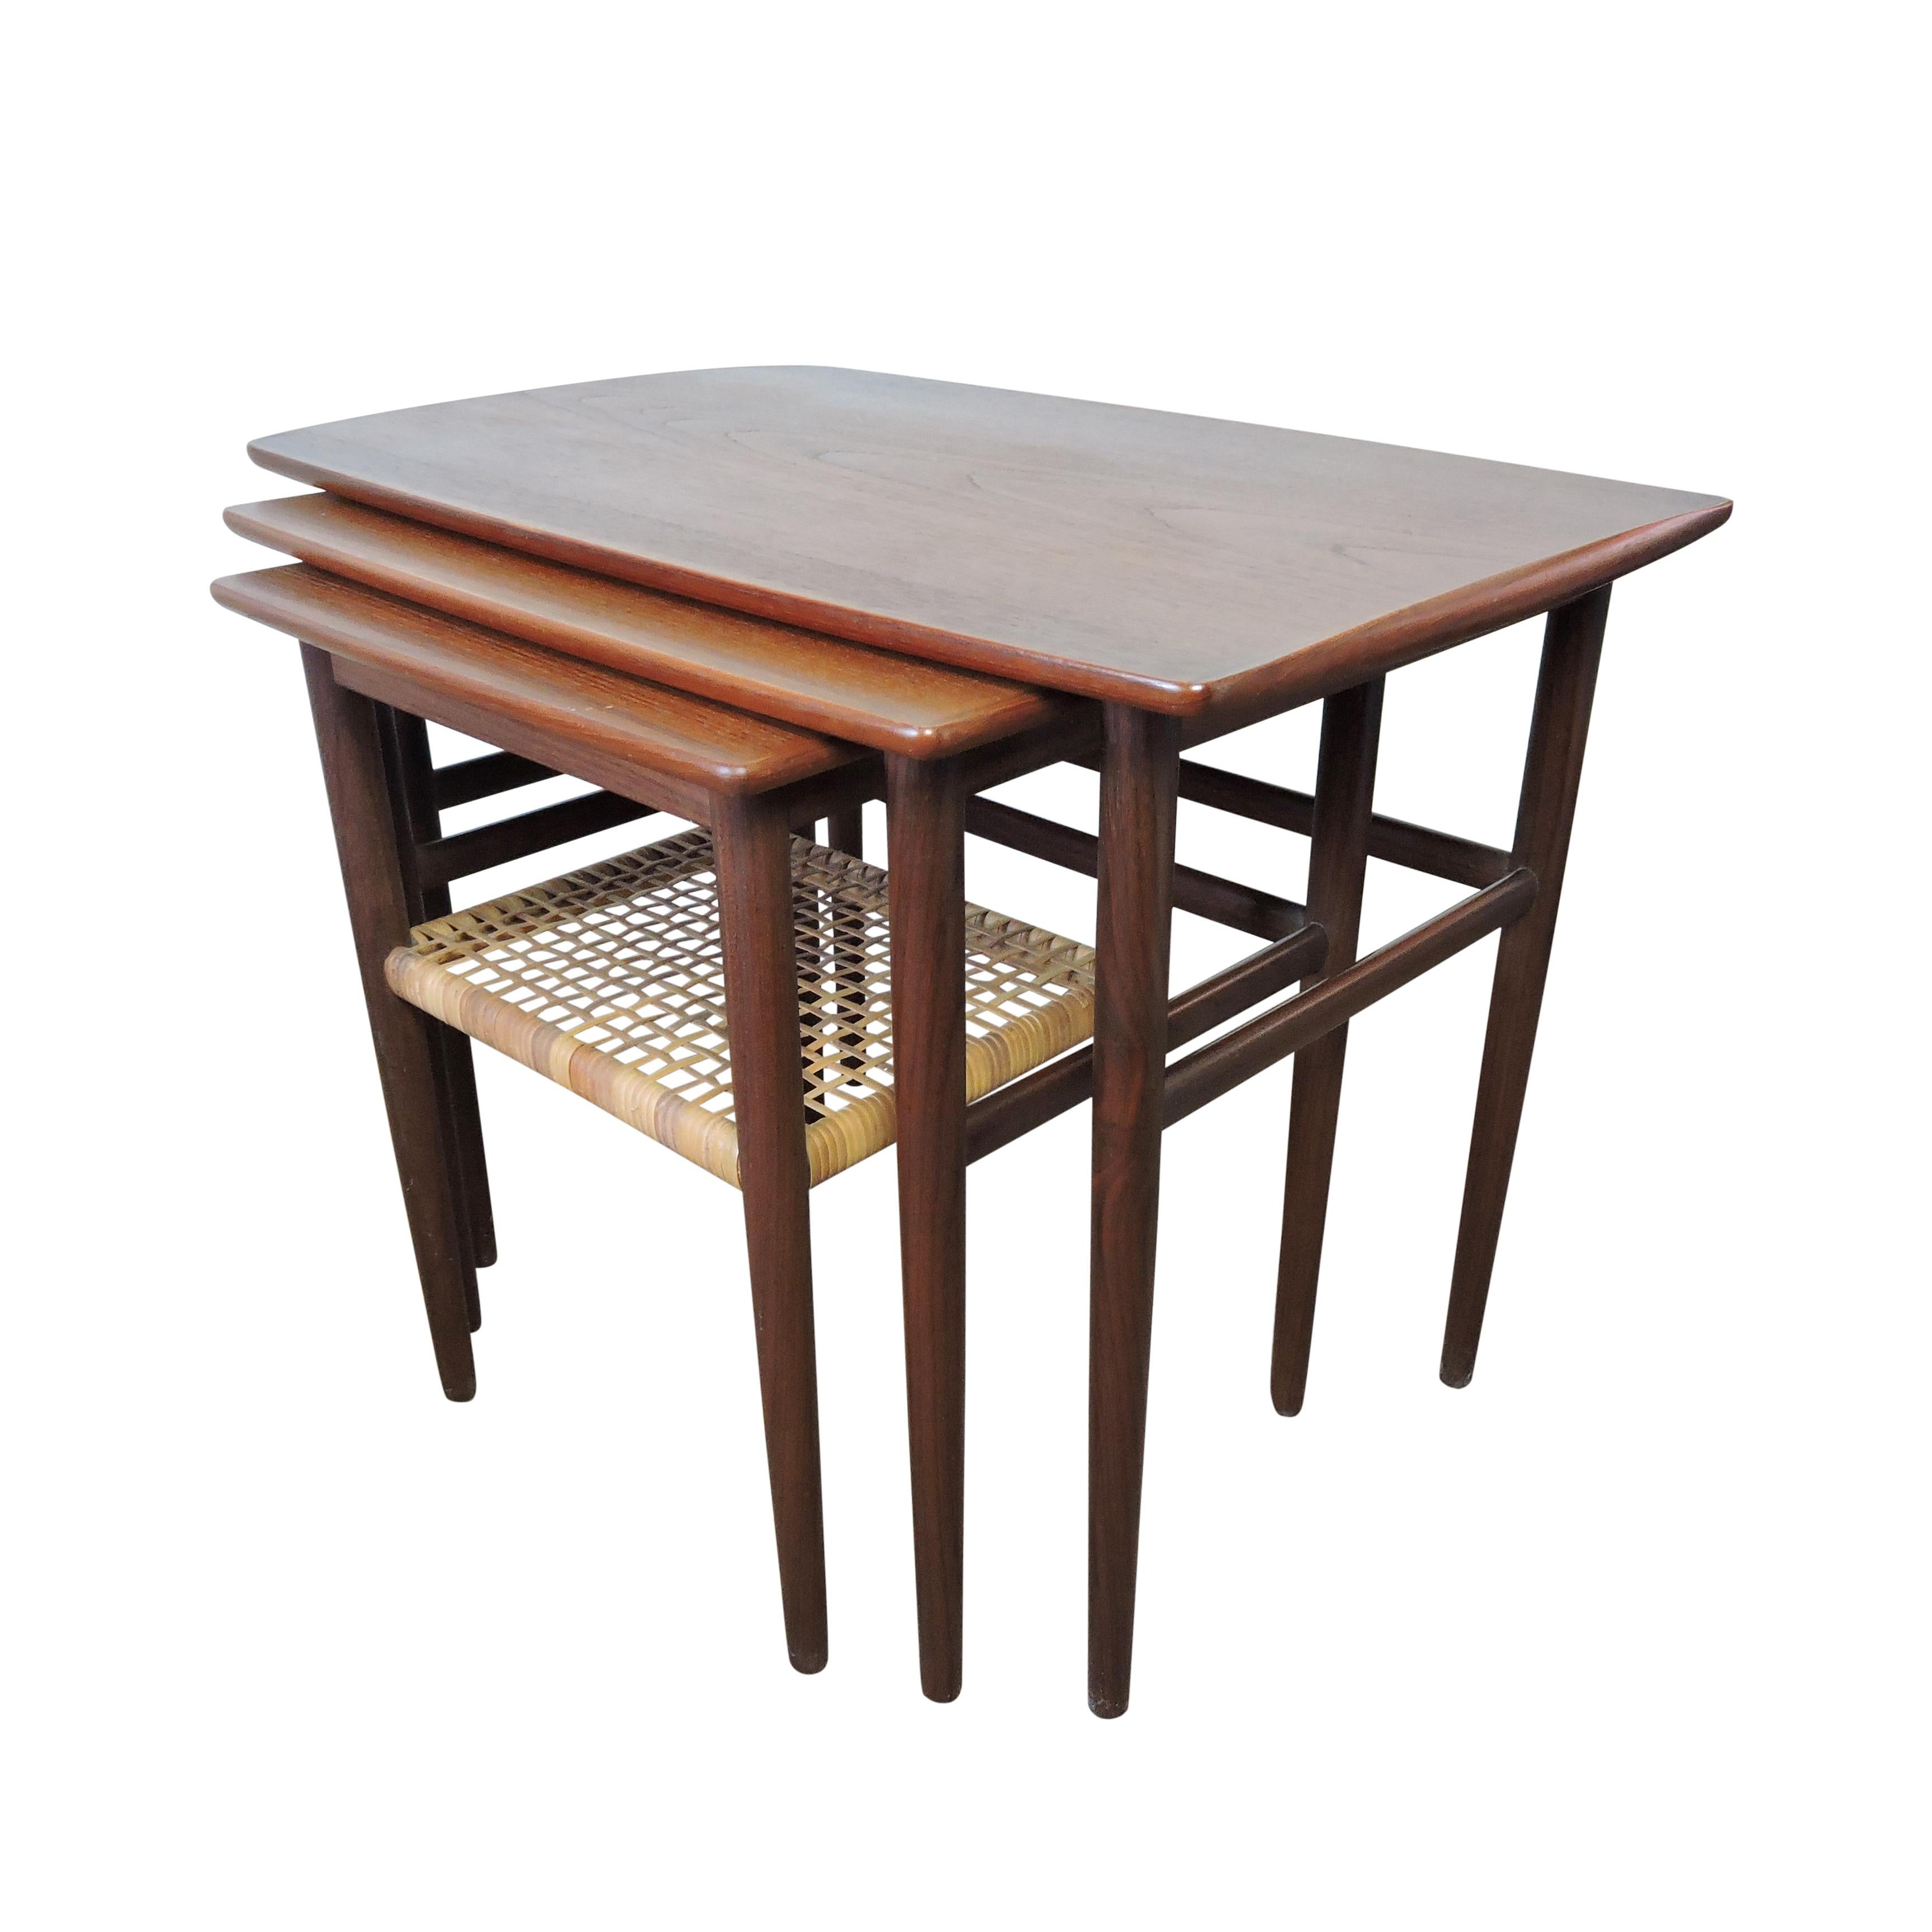 A 1950s midcentury set of nesting tables, designed and manufactured in Denmark. They are made of teak with a shelf made of cane.